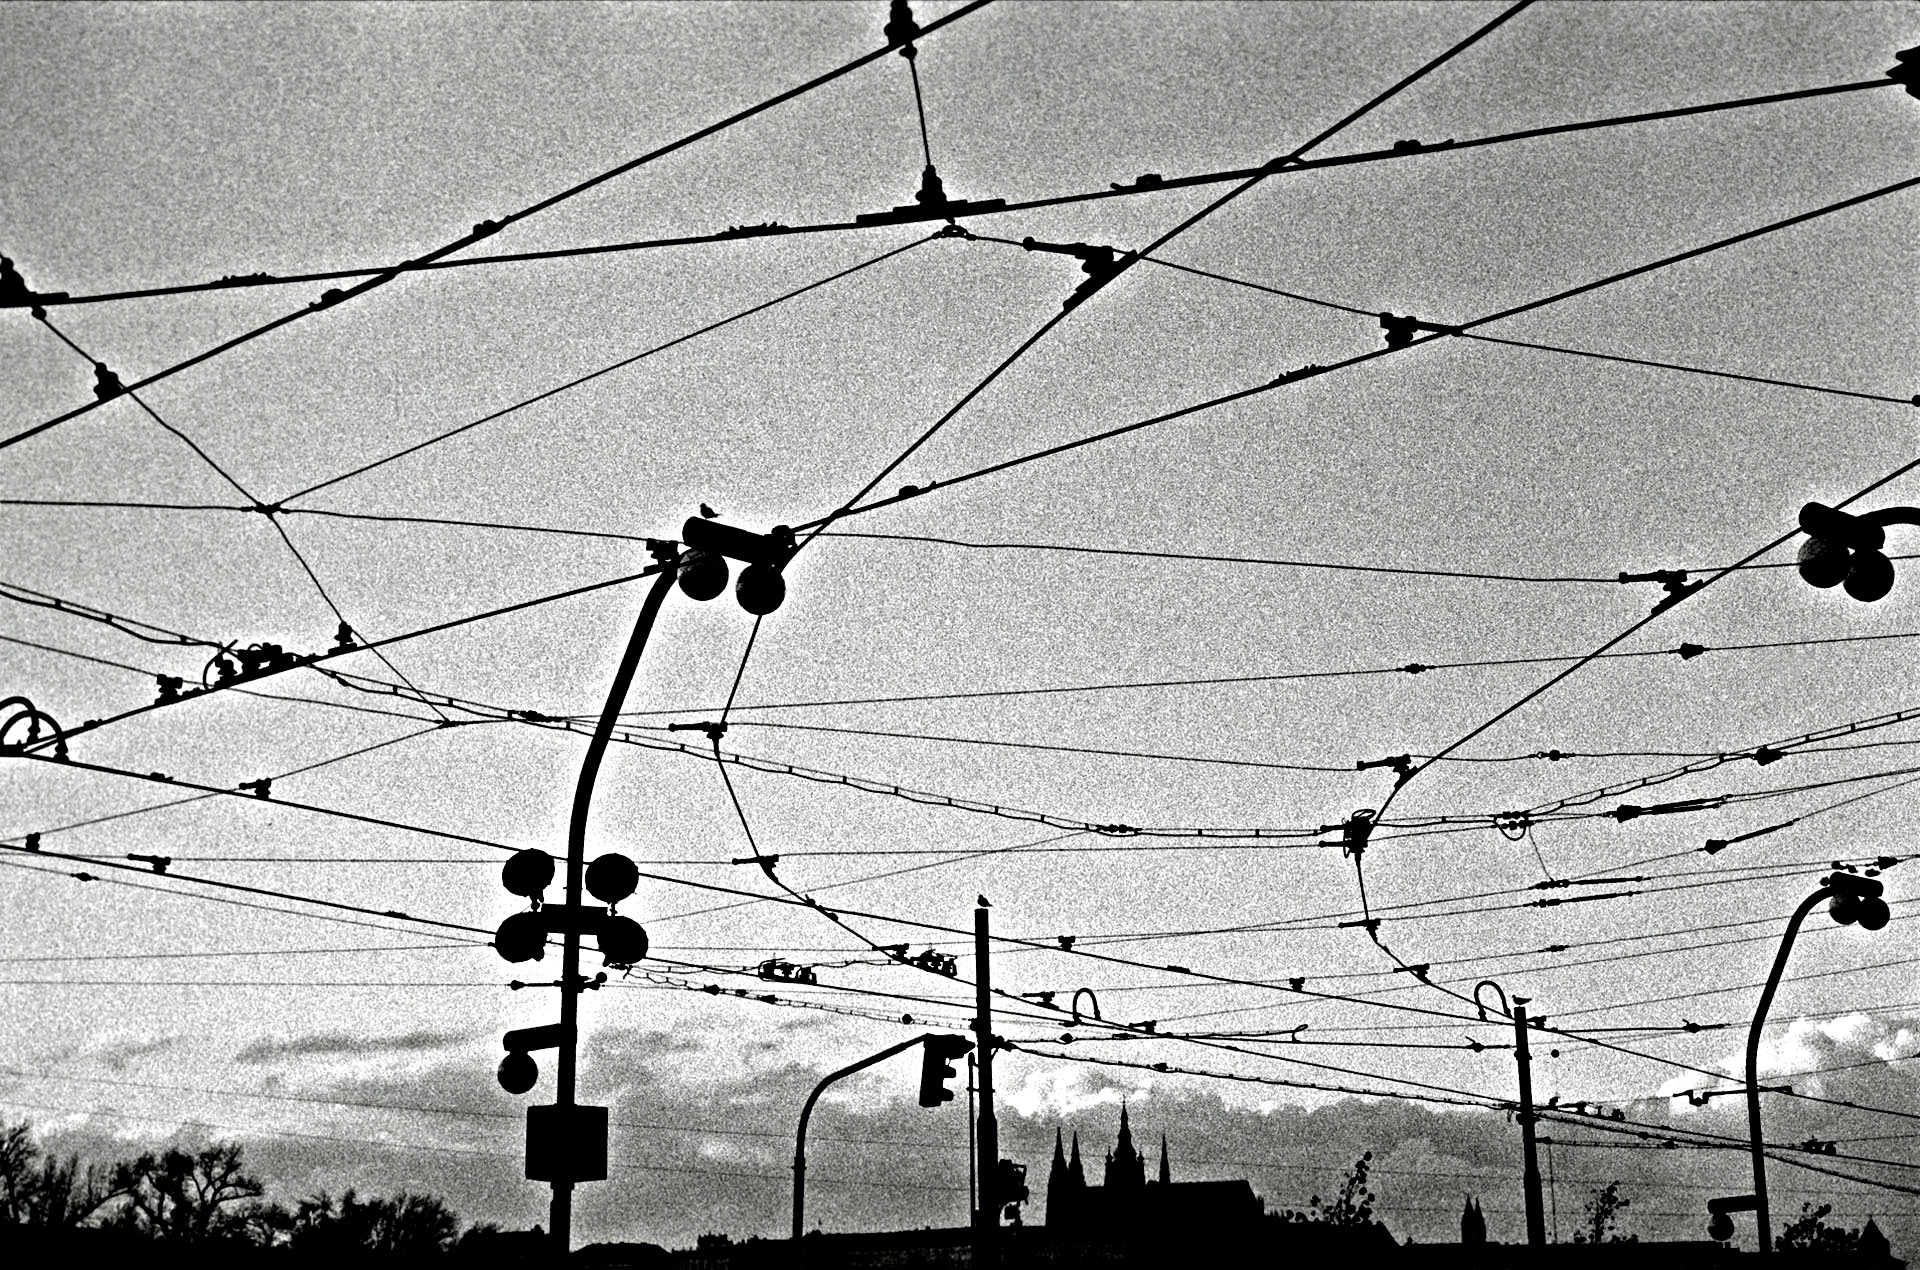  Wires Castle 